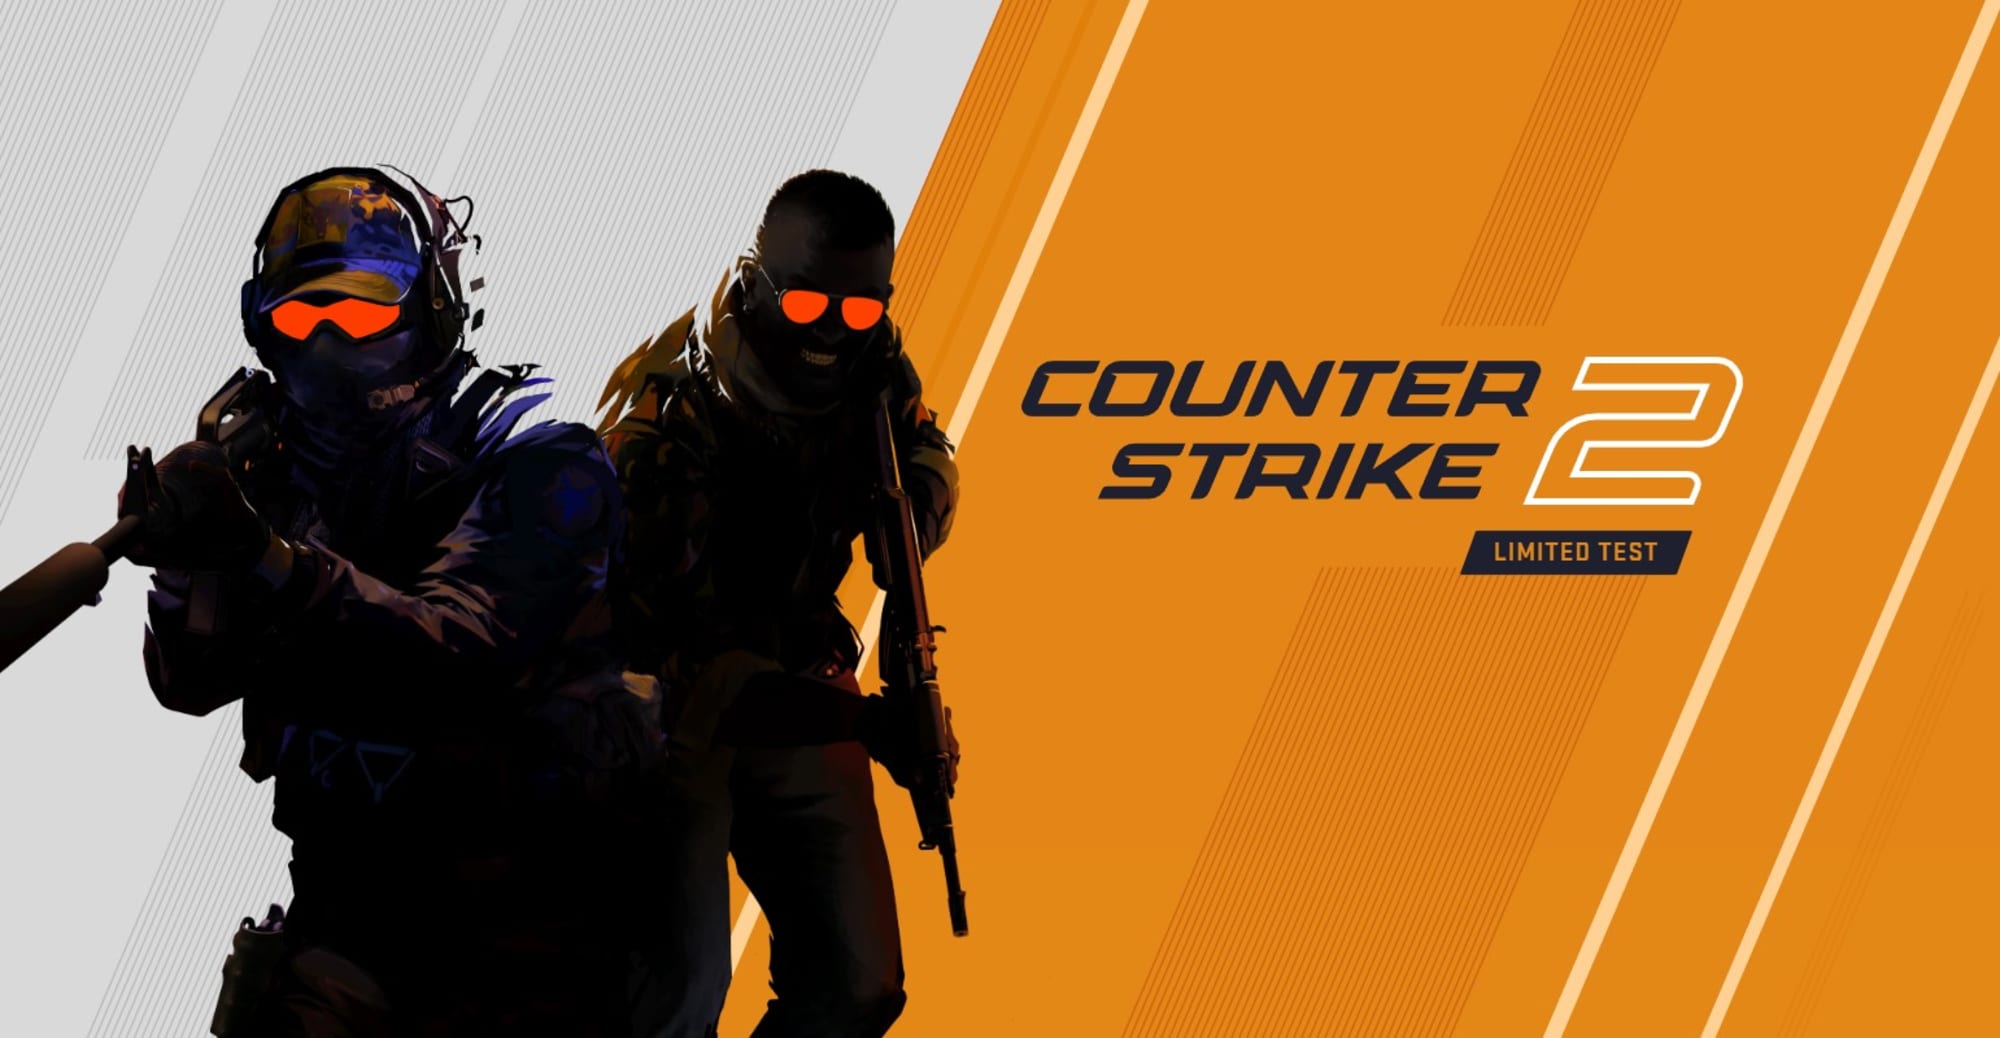 Is Counter-Strike 2 coming PS5 or X|S?